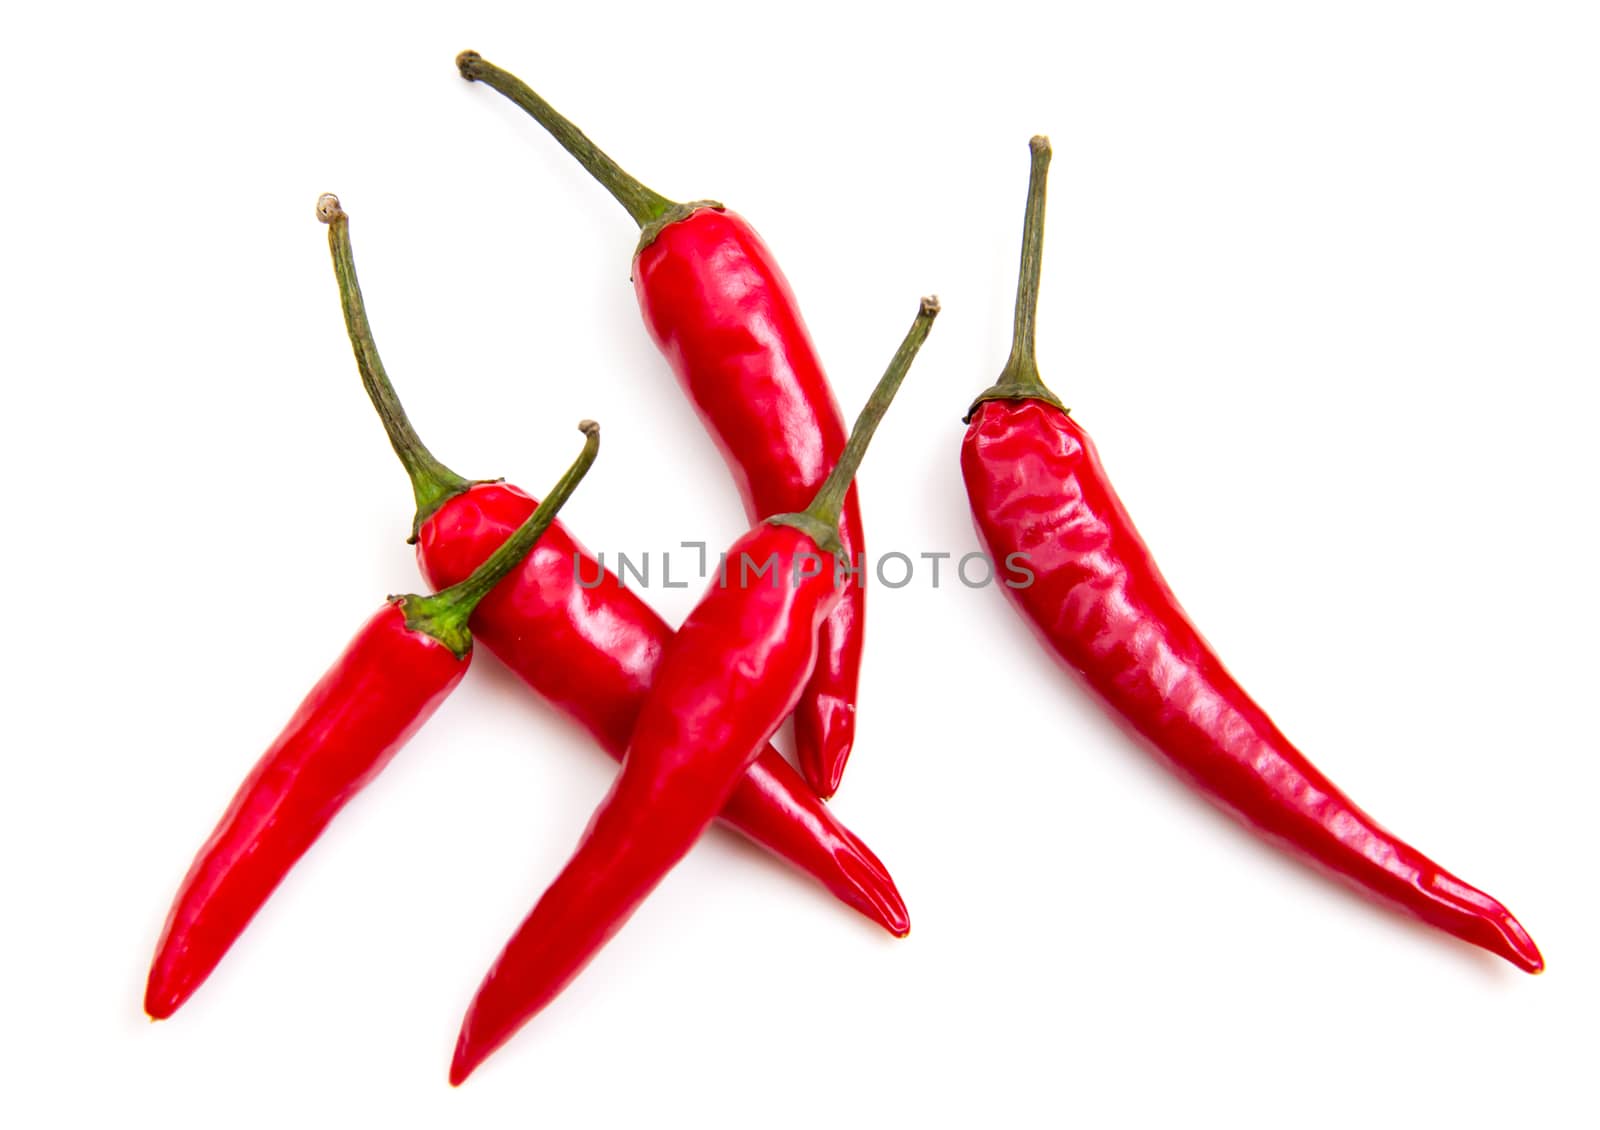 Hot peppers by spafra